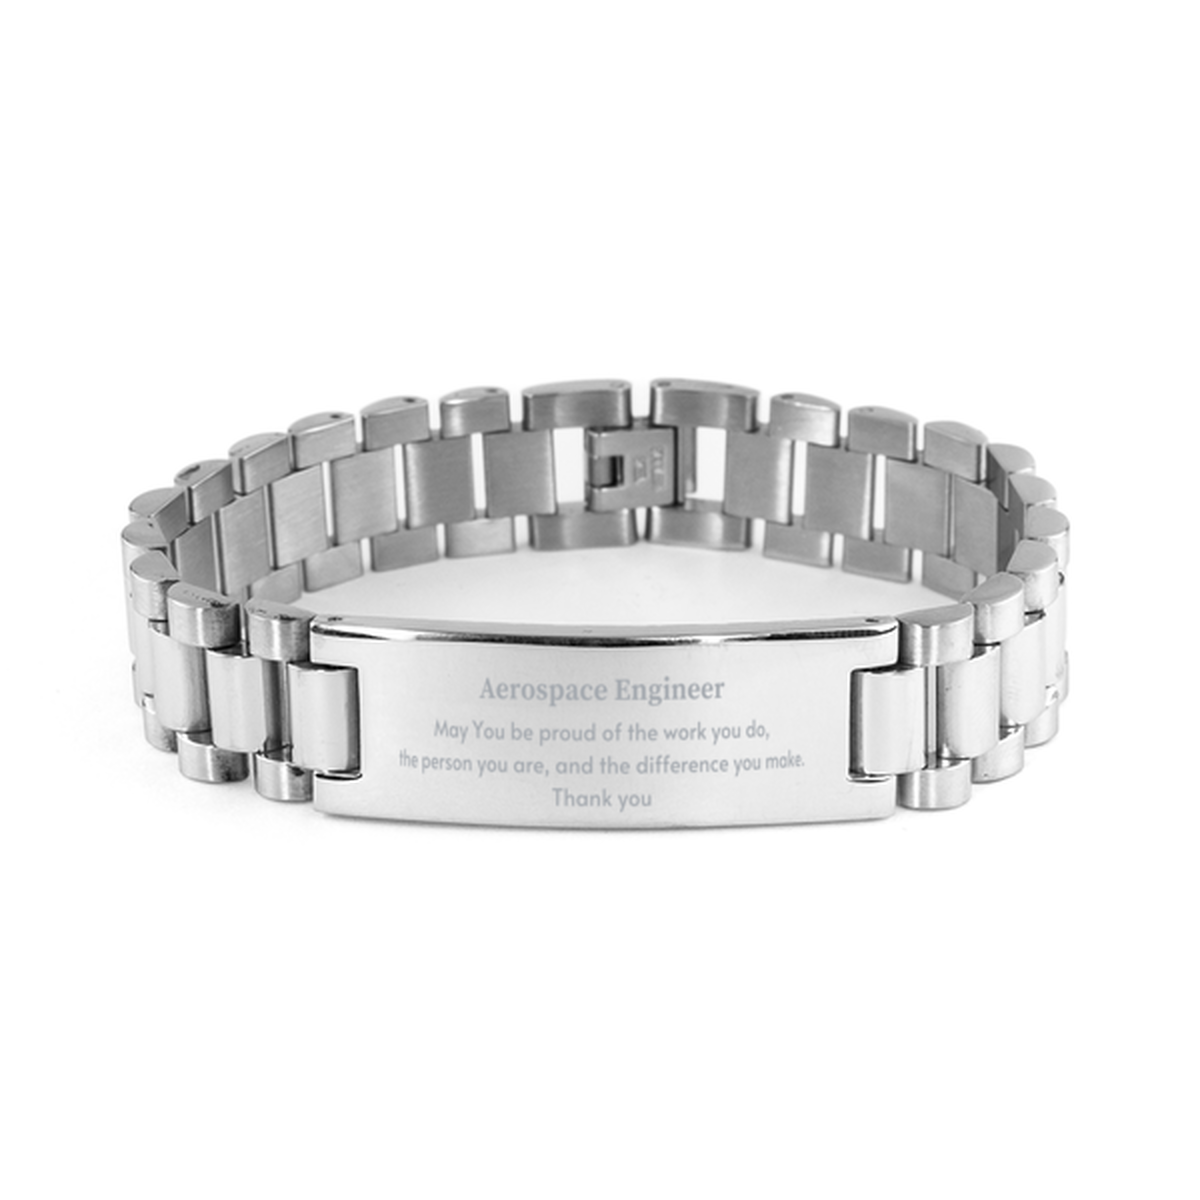 Heartwarming Ladder Stainless Steel Bracelet Retirement Coworkers Gifts for Aerospace Engineer, Aerospace Engineer May You be proud of the work you do, the person you are Gifts for Boss Men Women Friends